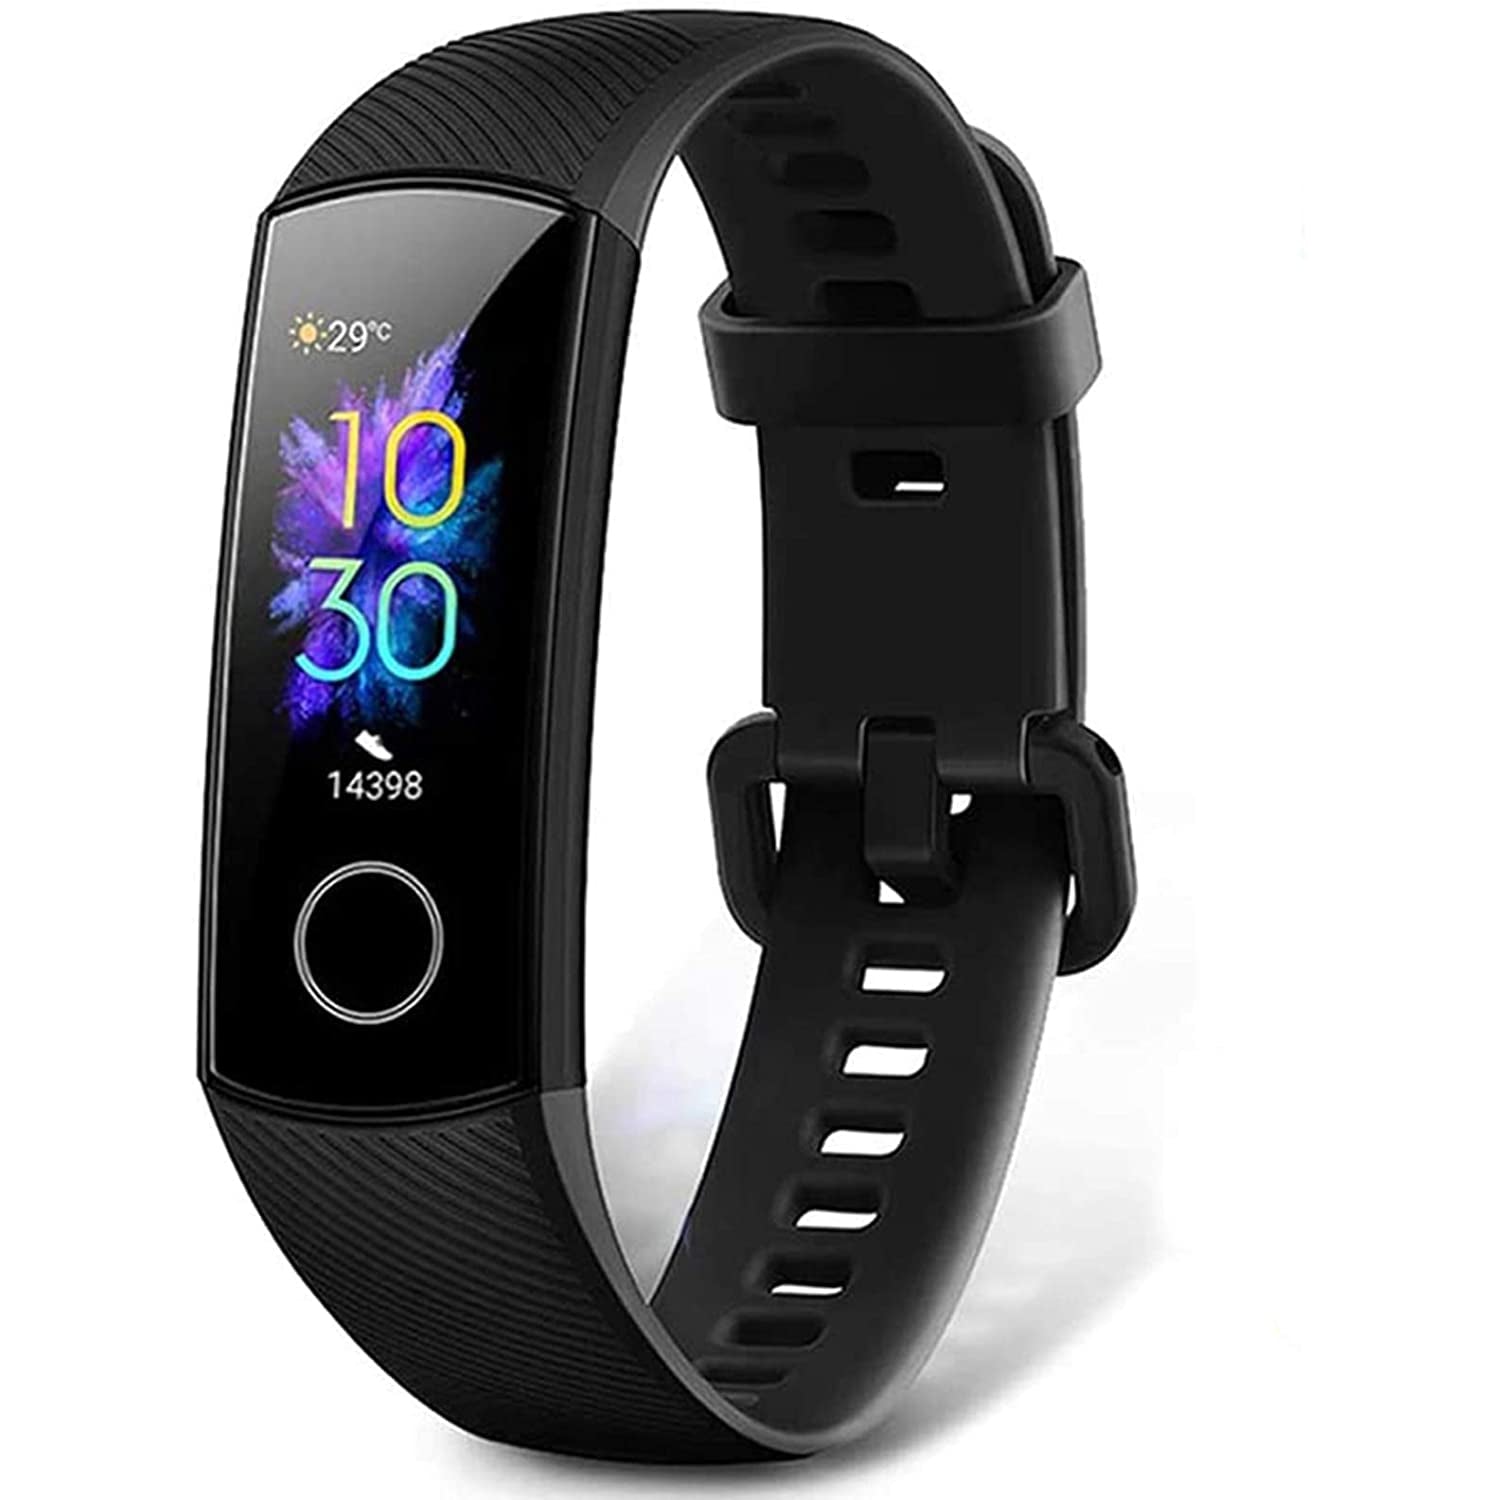 HONOR Band 5 Fitness Tracker with SpO2 Heart Rate and Sleep Monitor - Black - Refurbished Good